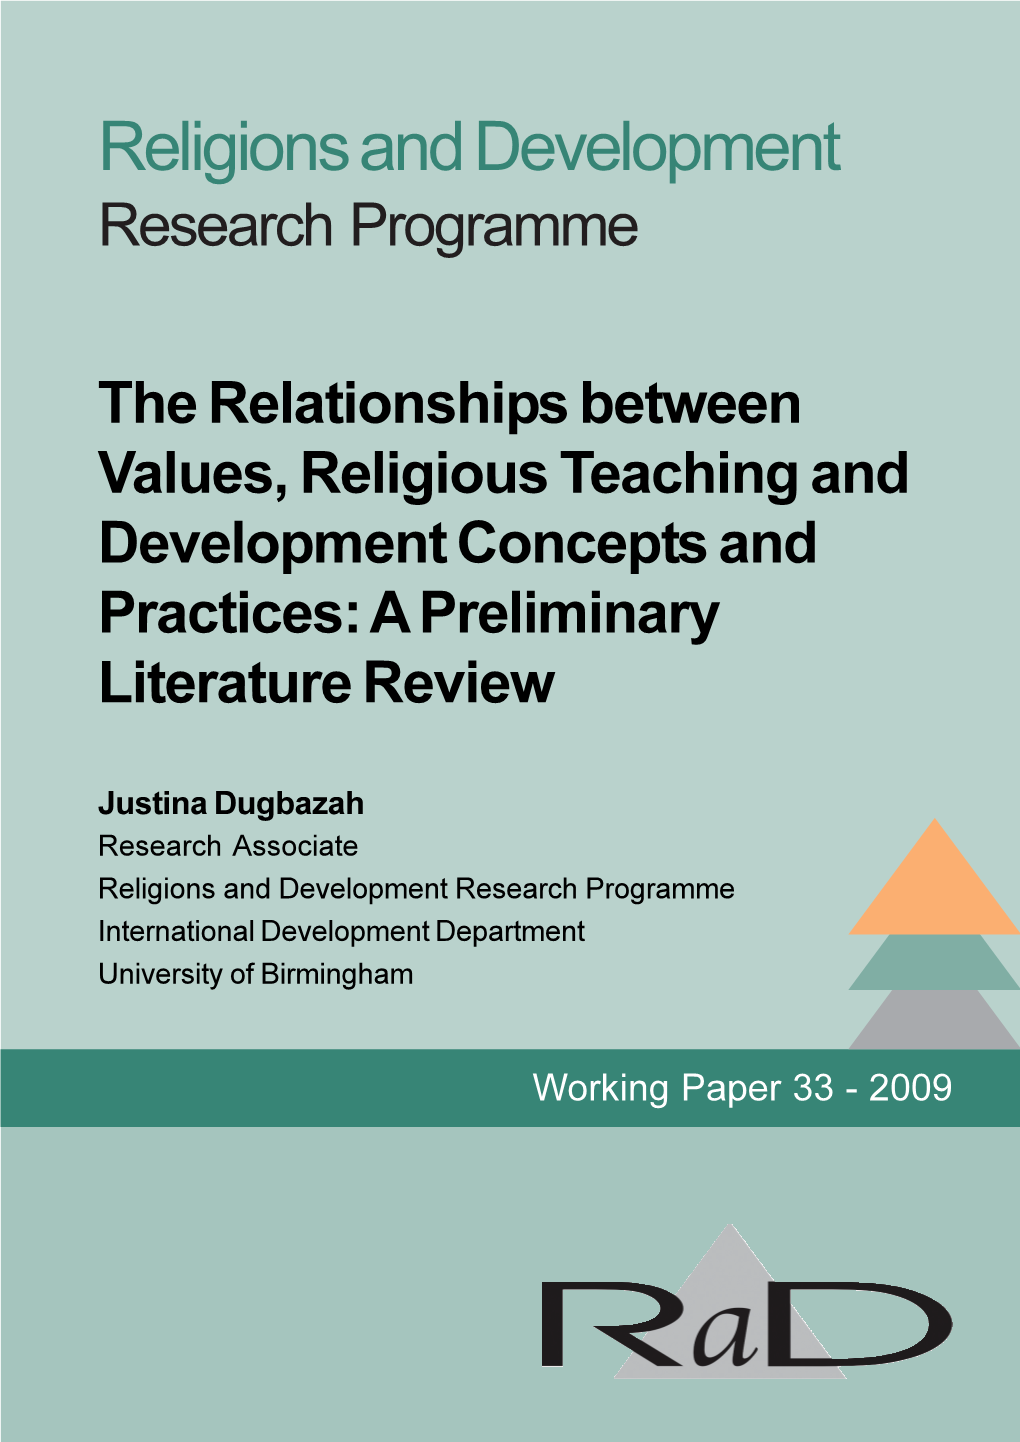 The Relationships Between Values, Religious Teaching and Development Concepts and Practices: a Preliminary Literature Review